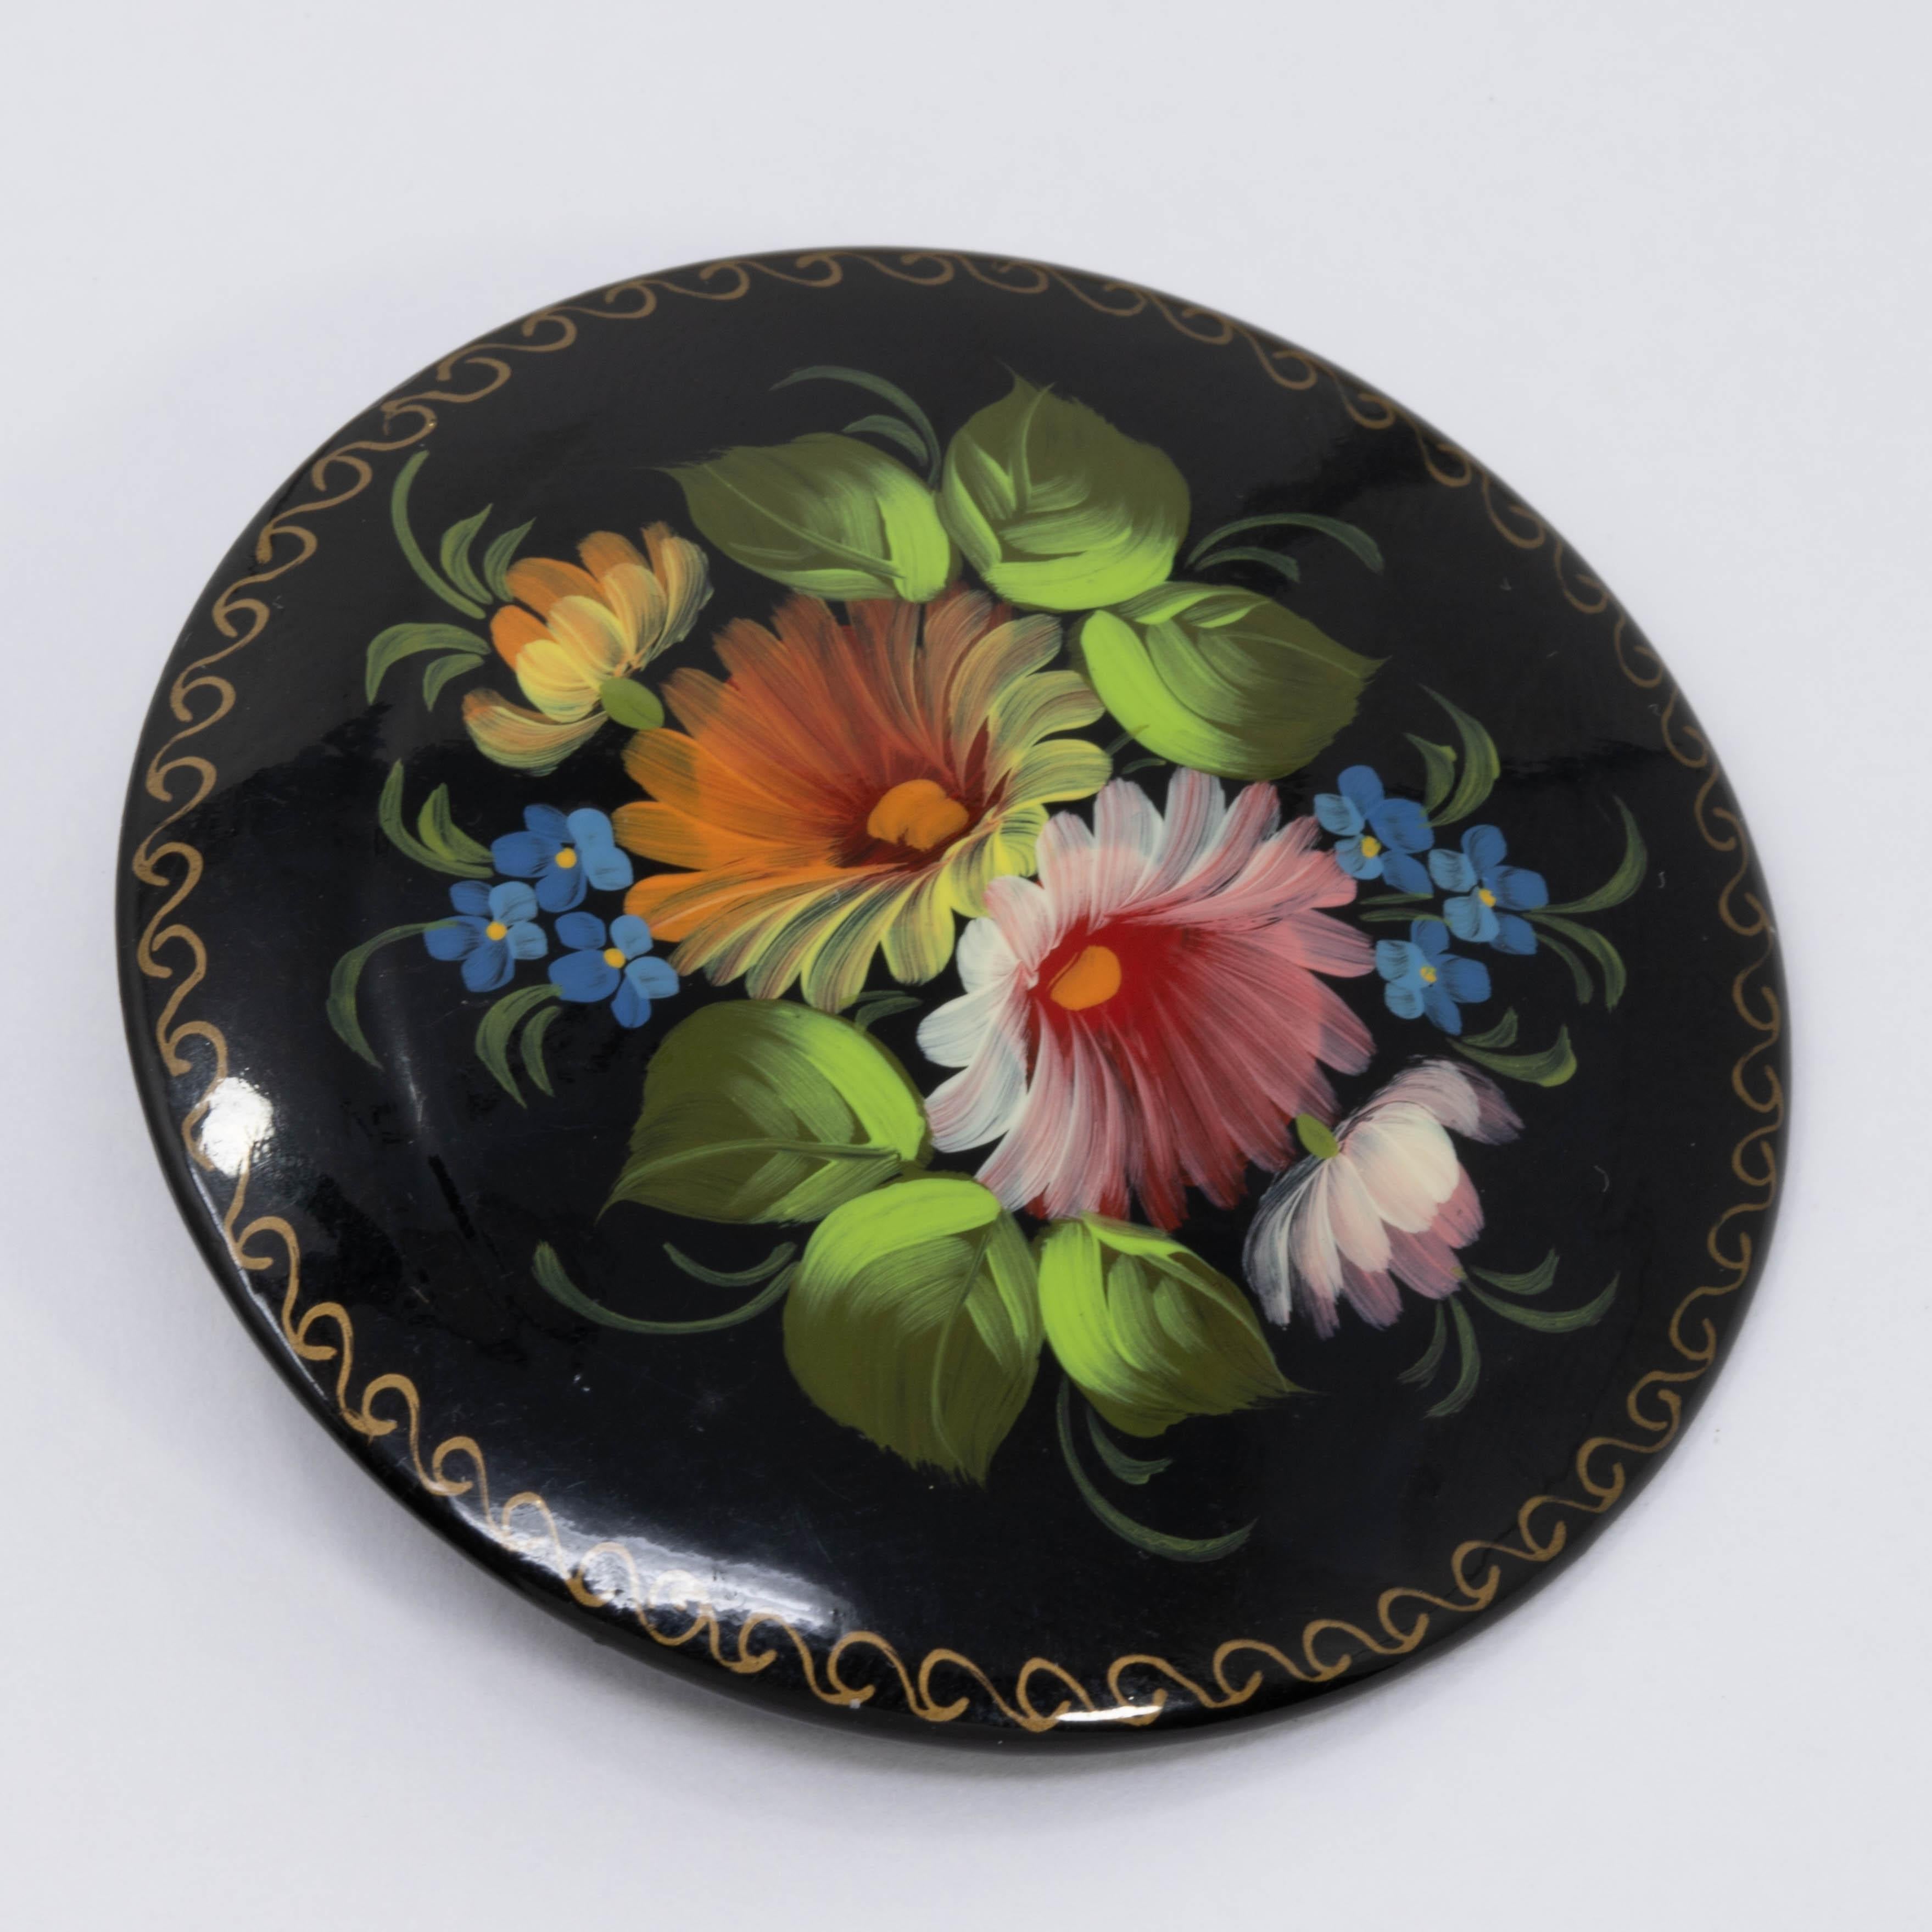 A masterfully painted wooden vintage Russian Lacquered pin featuring a colorful bouquet of flowers, with a golden-accent border.

Hand signed in Cyrillic on the back